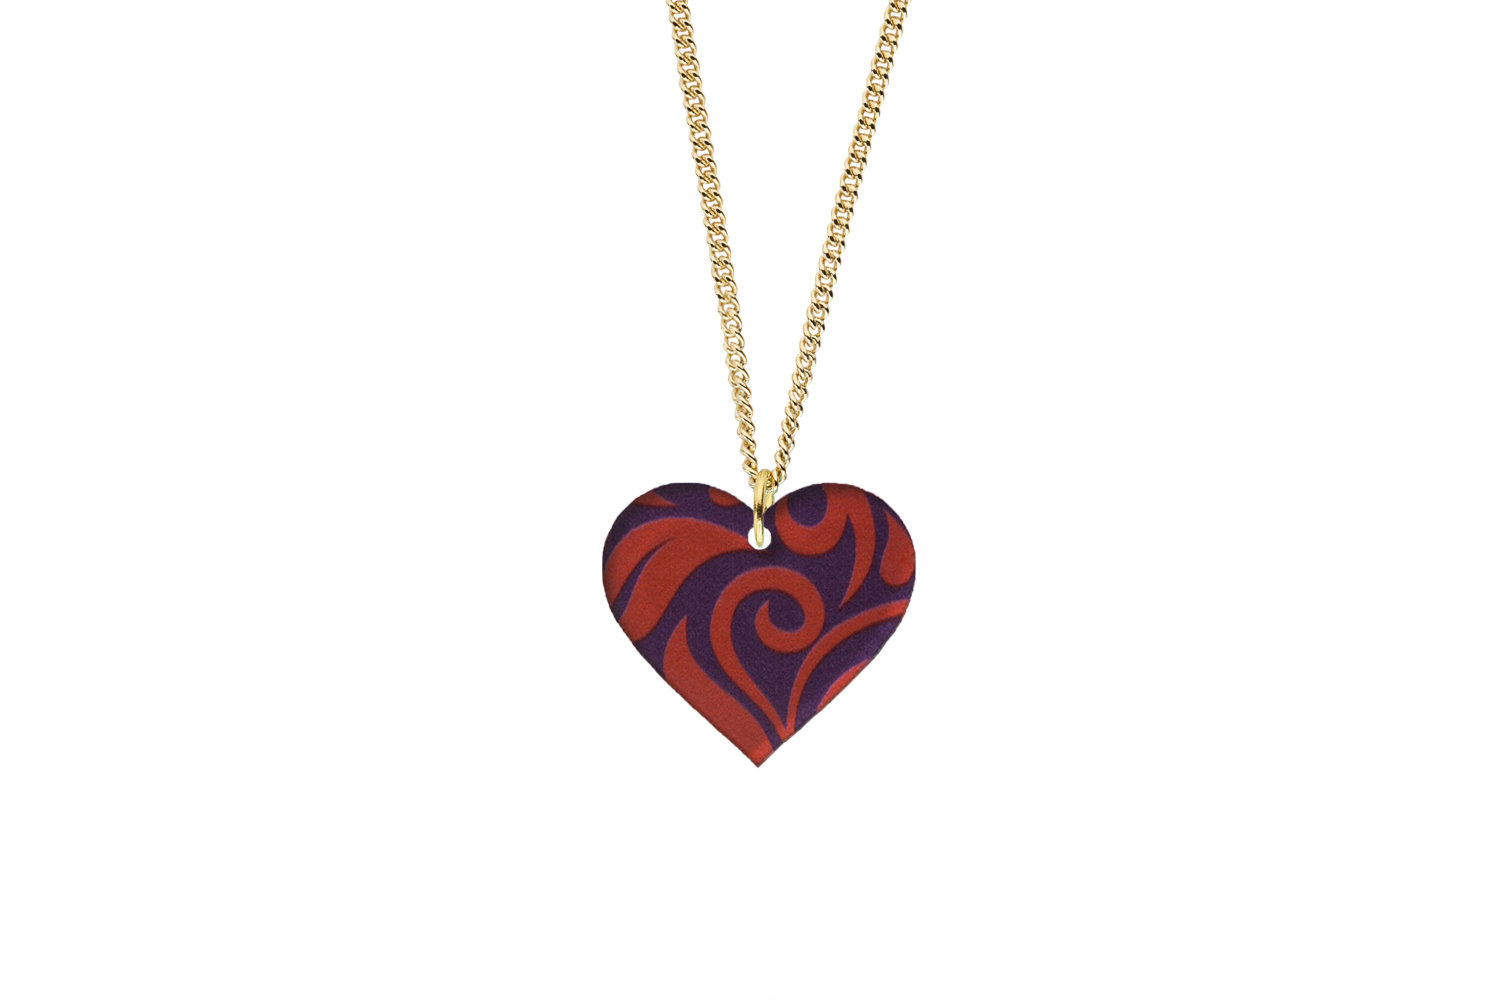 Heart Pendant Sculpted Style on Chain Necklace